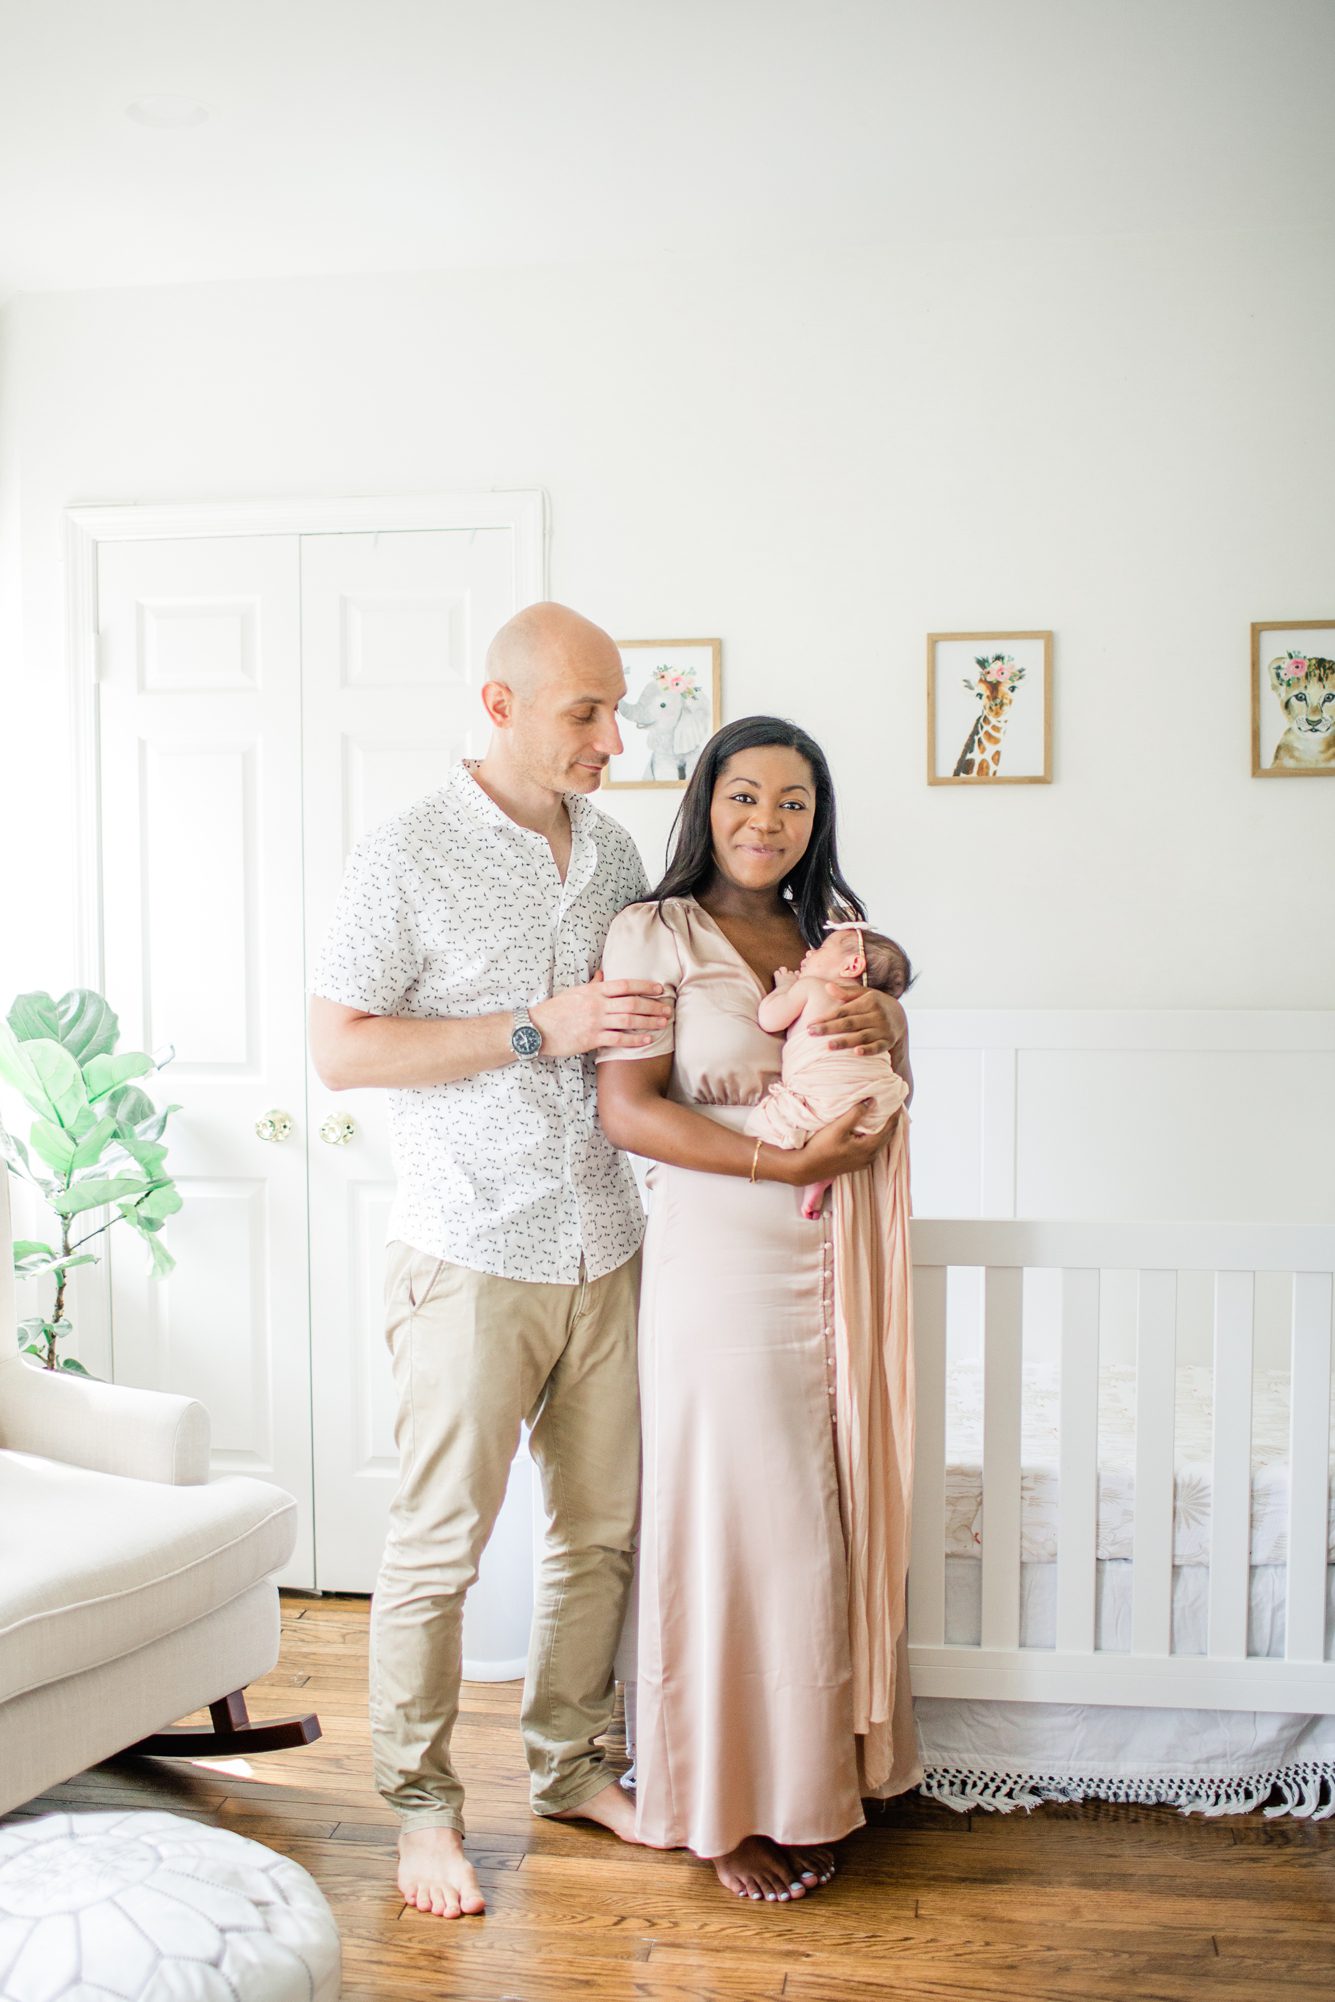 Beautiful portrait of new family of three during lifestyle newborn session Photo by LRG Portraits.